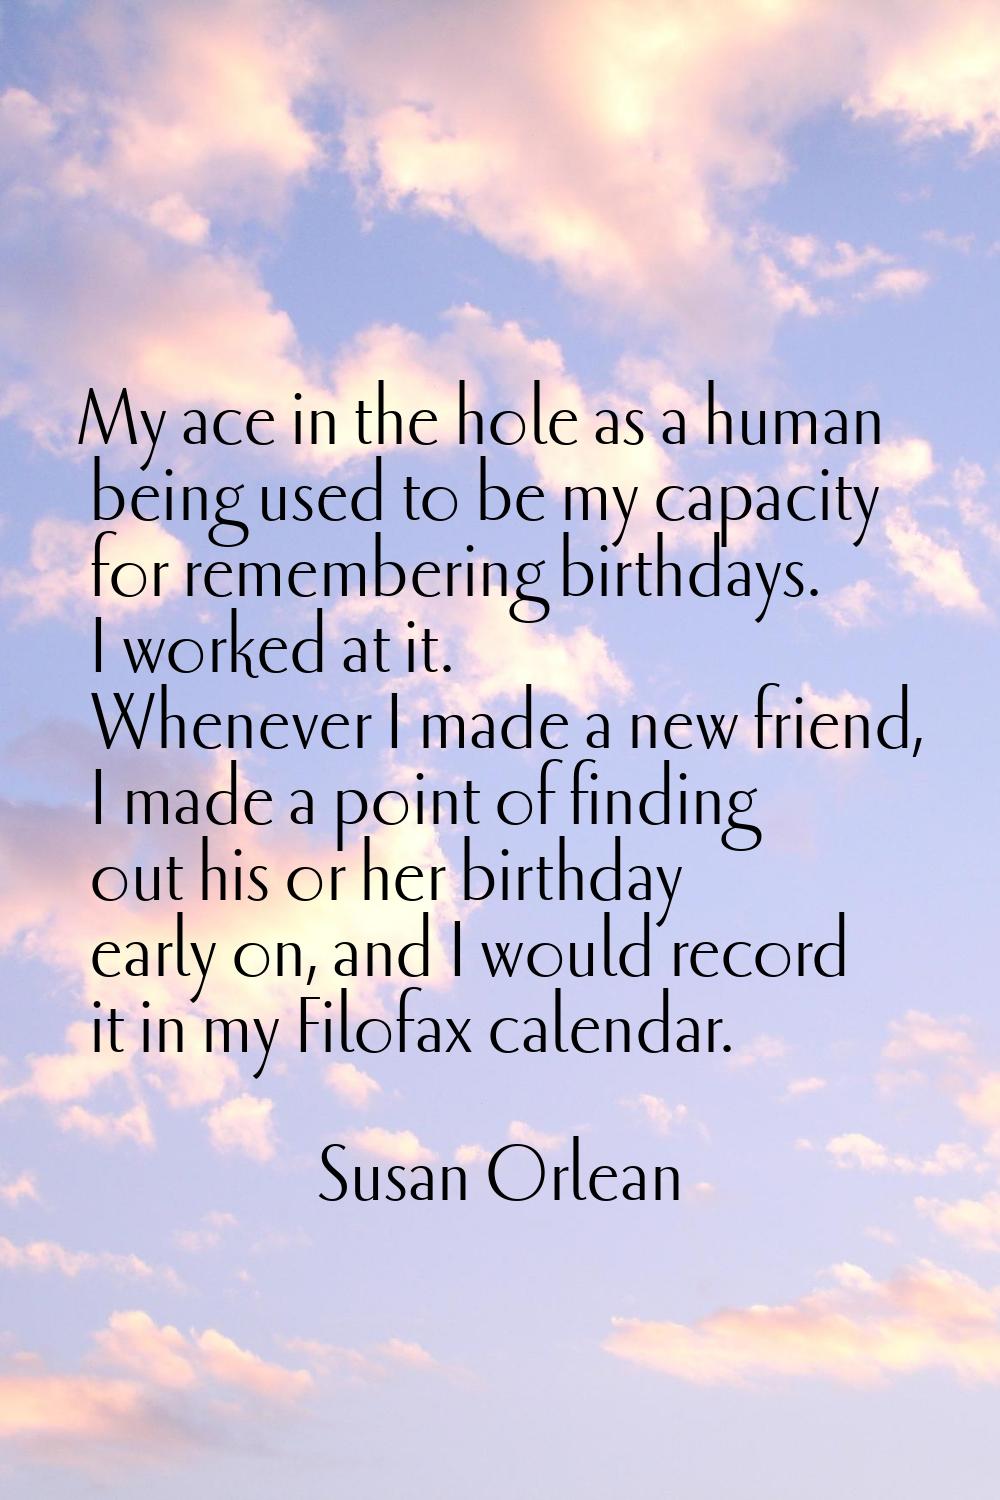 My ace in the hole as a human being used to be my capacity for remembering birthdays. I worked at i